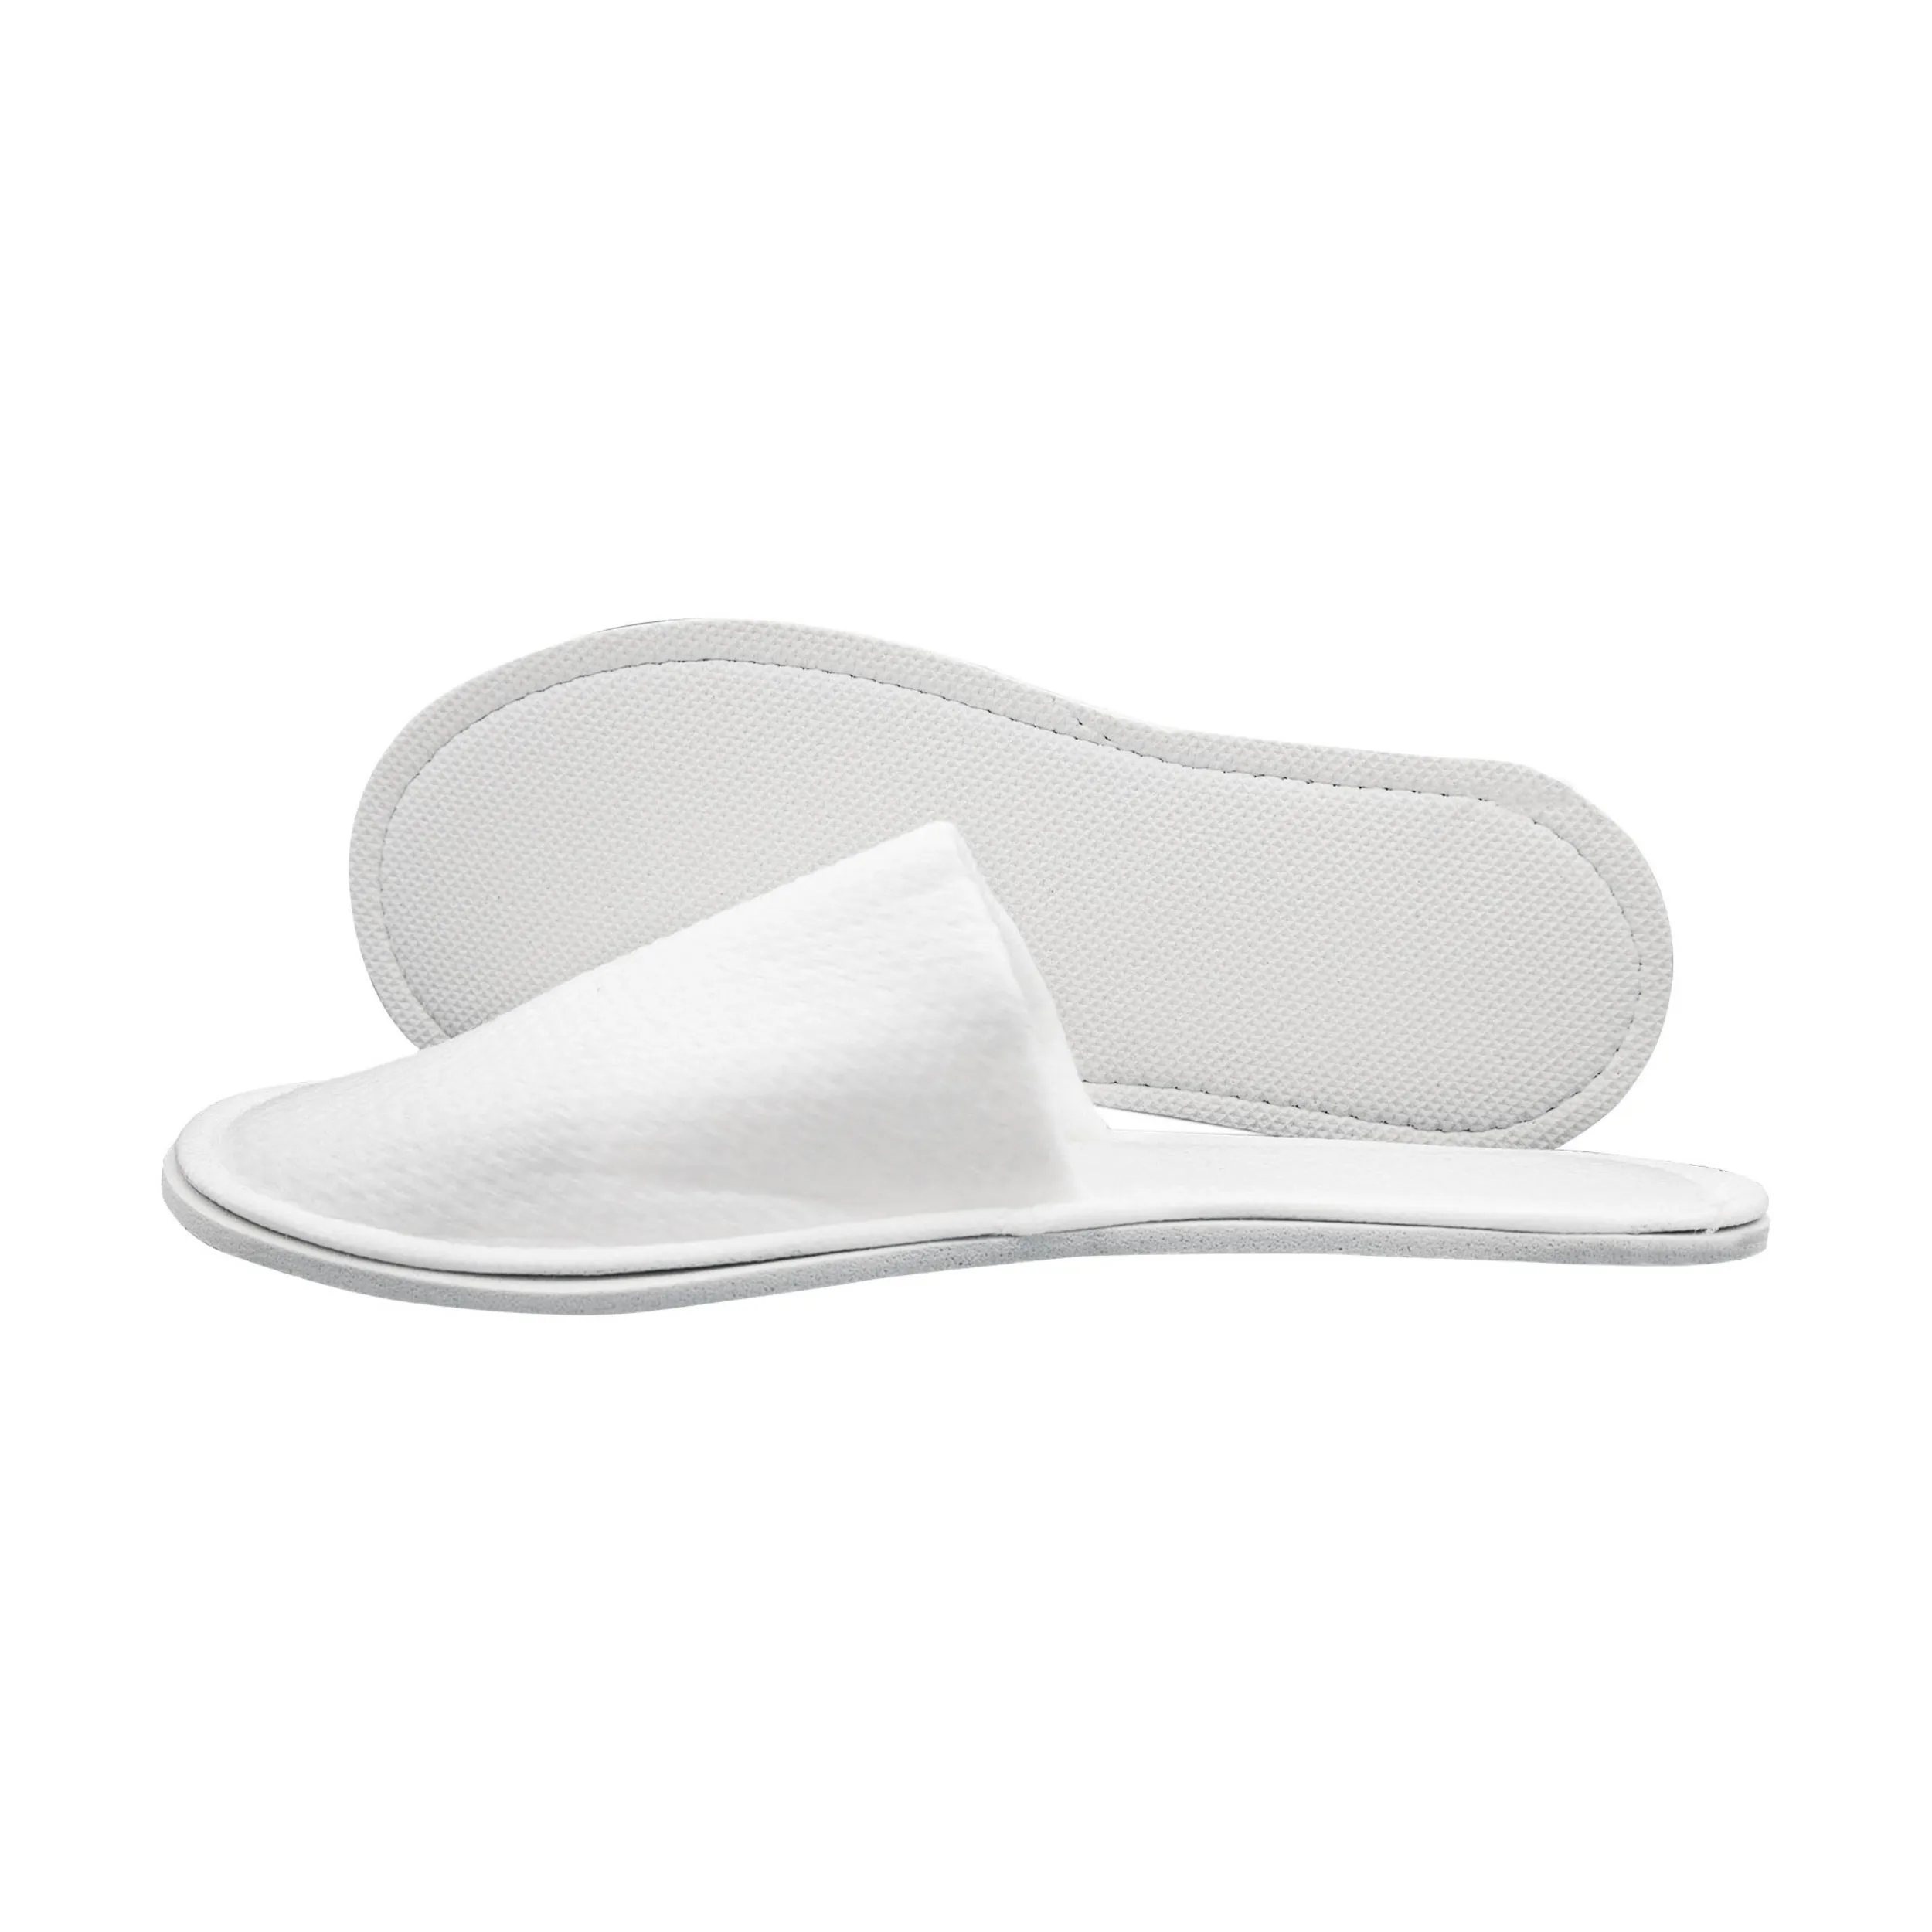 Custom Logo Hotel Amenities Disposable White Hotel Guest Slippers Honeycomb Towel Double Layer Double Sole Slippers